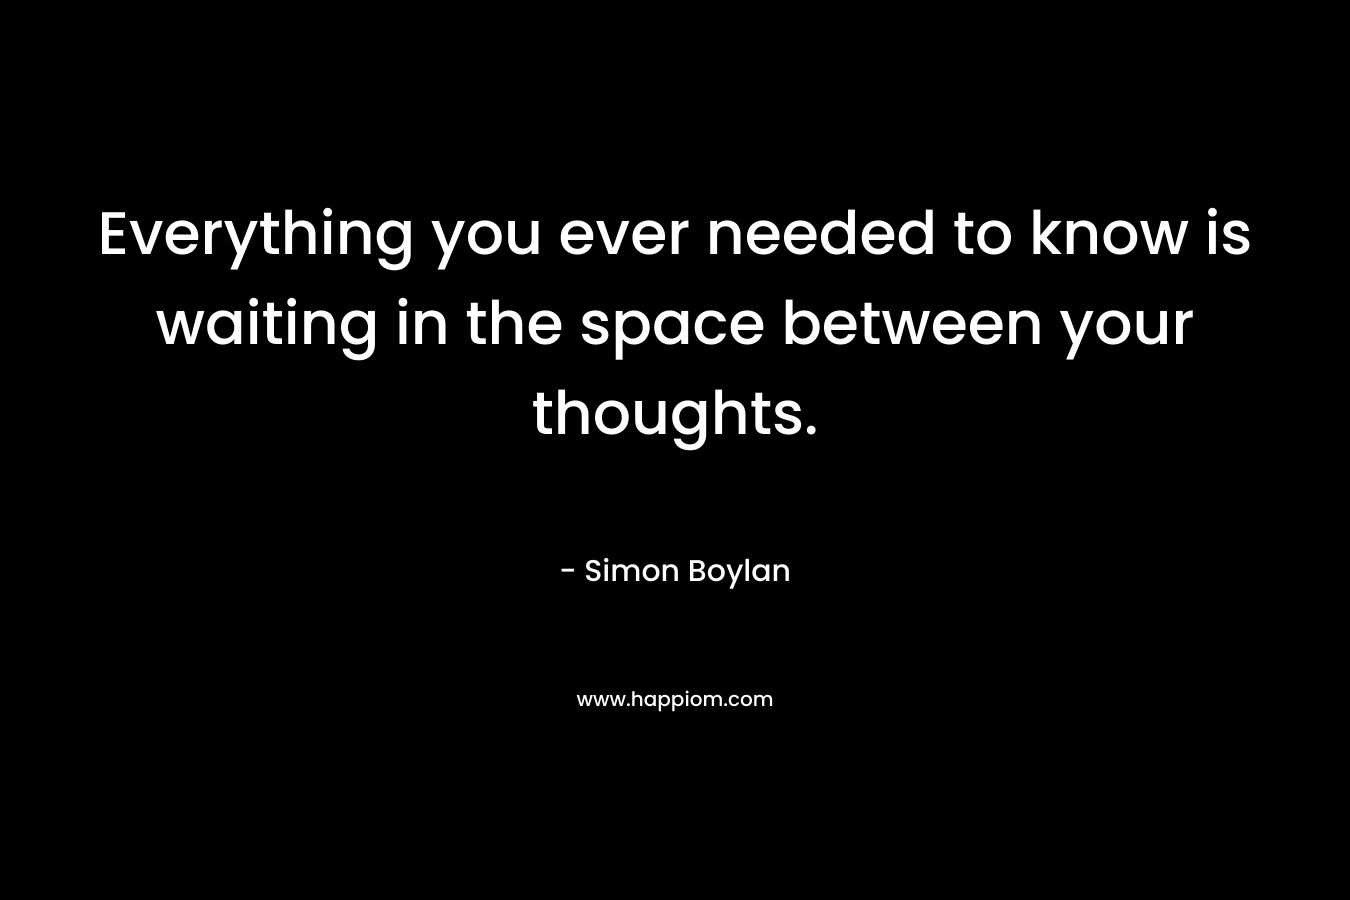 Everything you ever needed to know is waiting in the space between your thoughts.